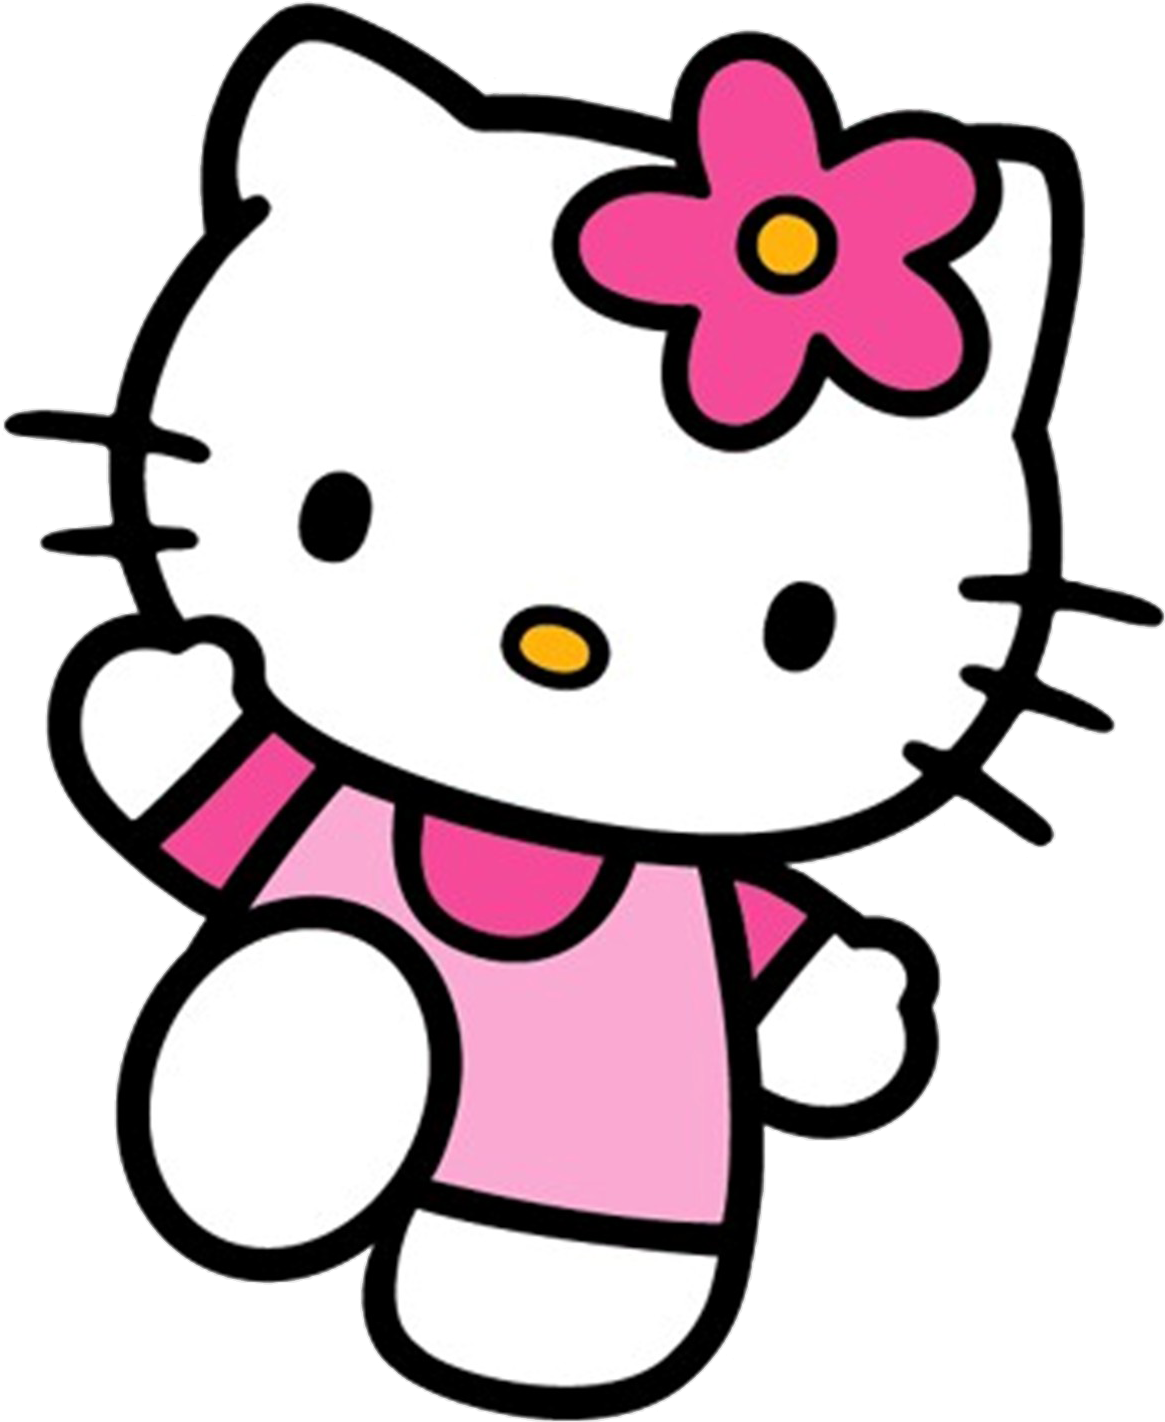 Rose hello kitty PNG image image